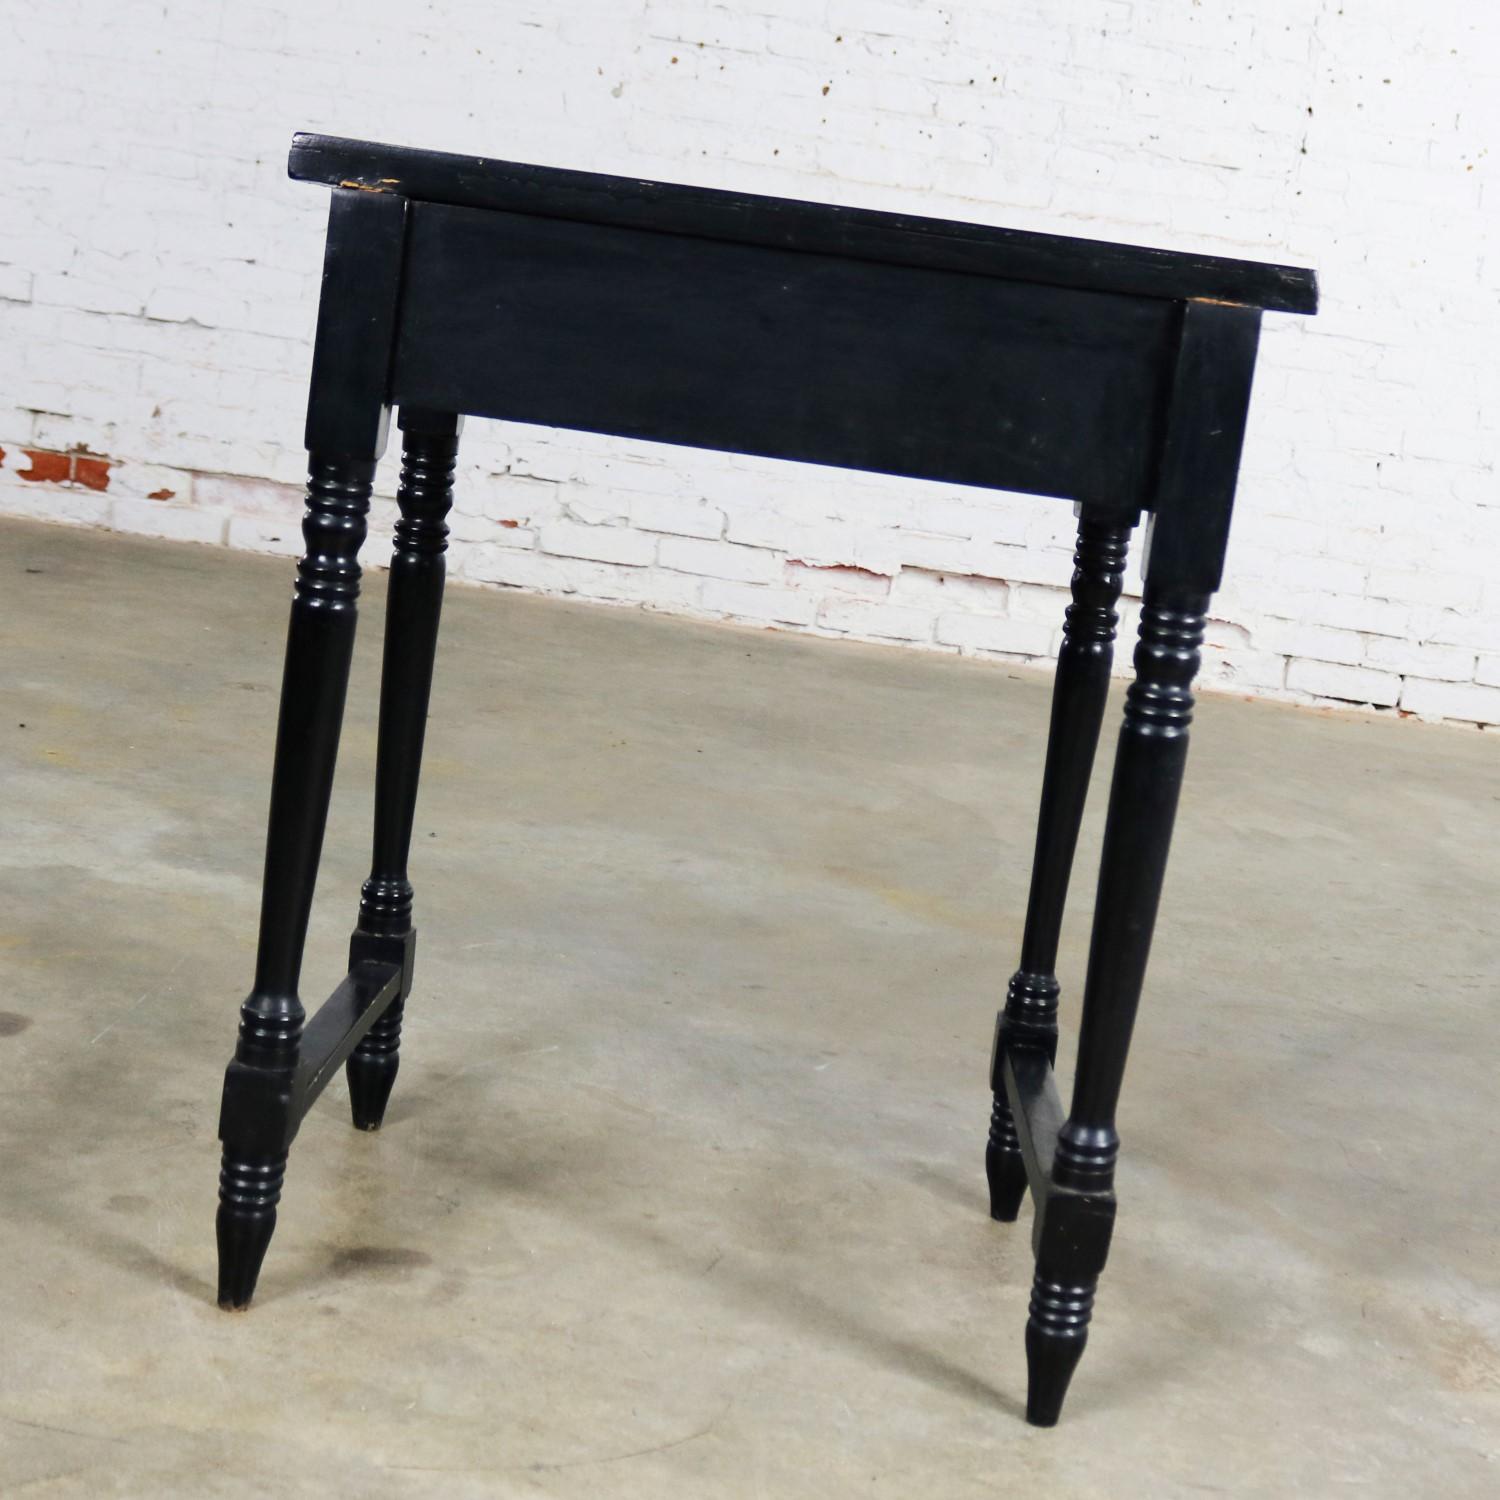 Vintage Mexican Black Turned Leg Drawered End Table Matador & Bull Tile Top In Distressed Condition For Sale In Topeka, KS